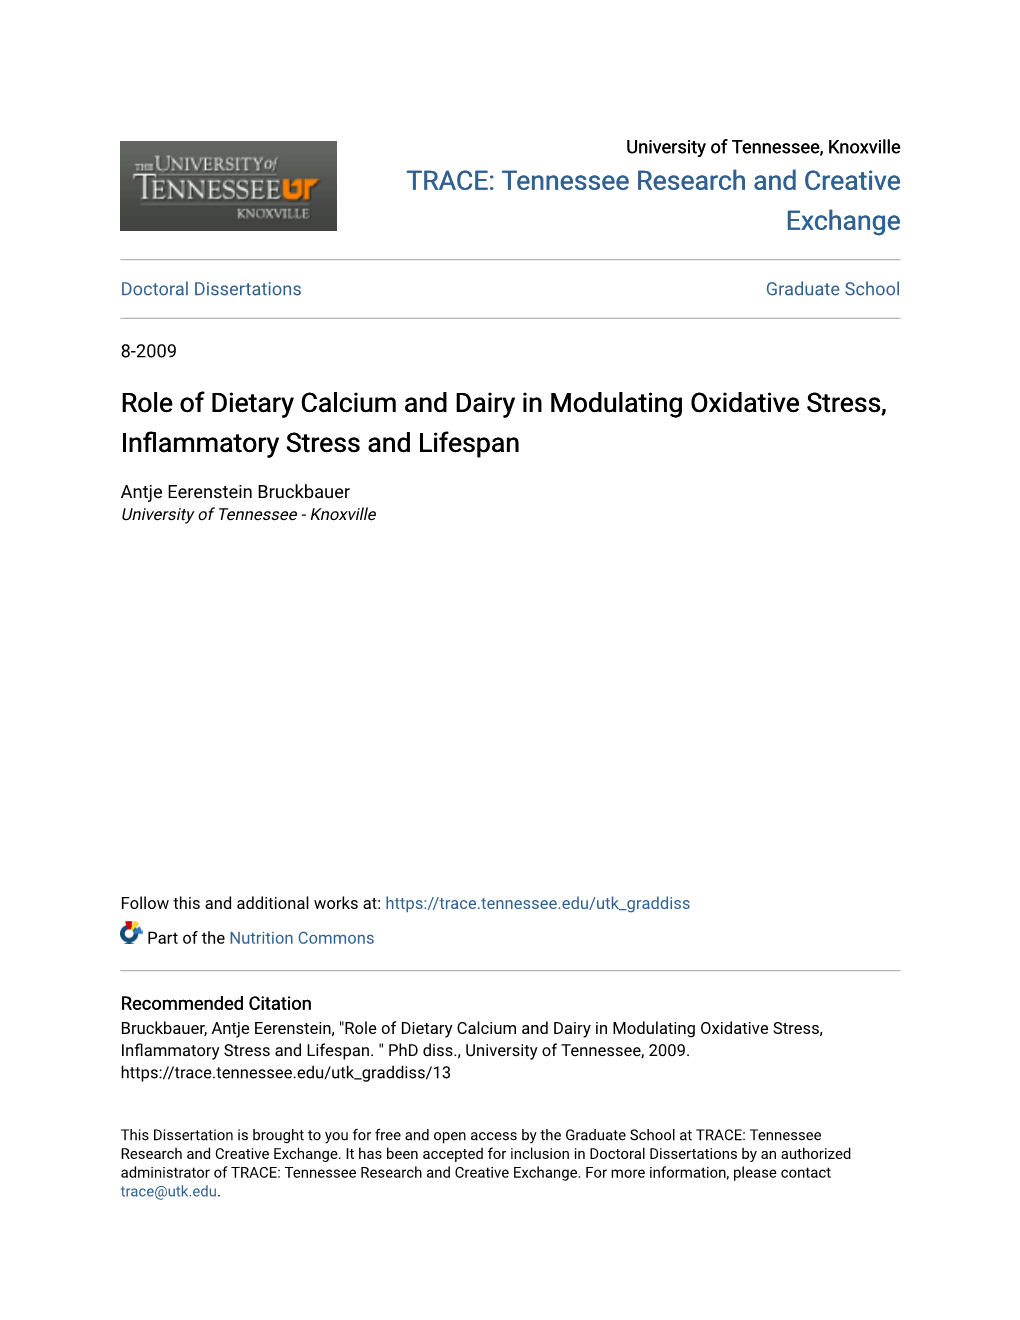 Role of Dietary Calcium and Dairy in Modulating Oxidative Stress, Inflammatory Stress and Lifespan